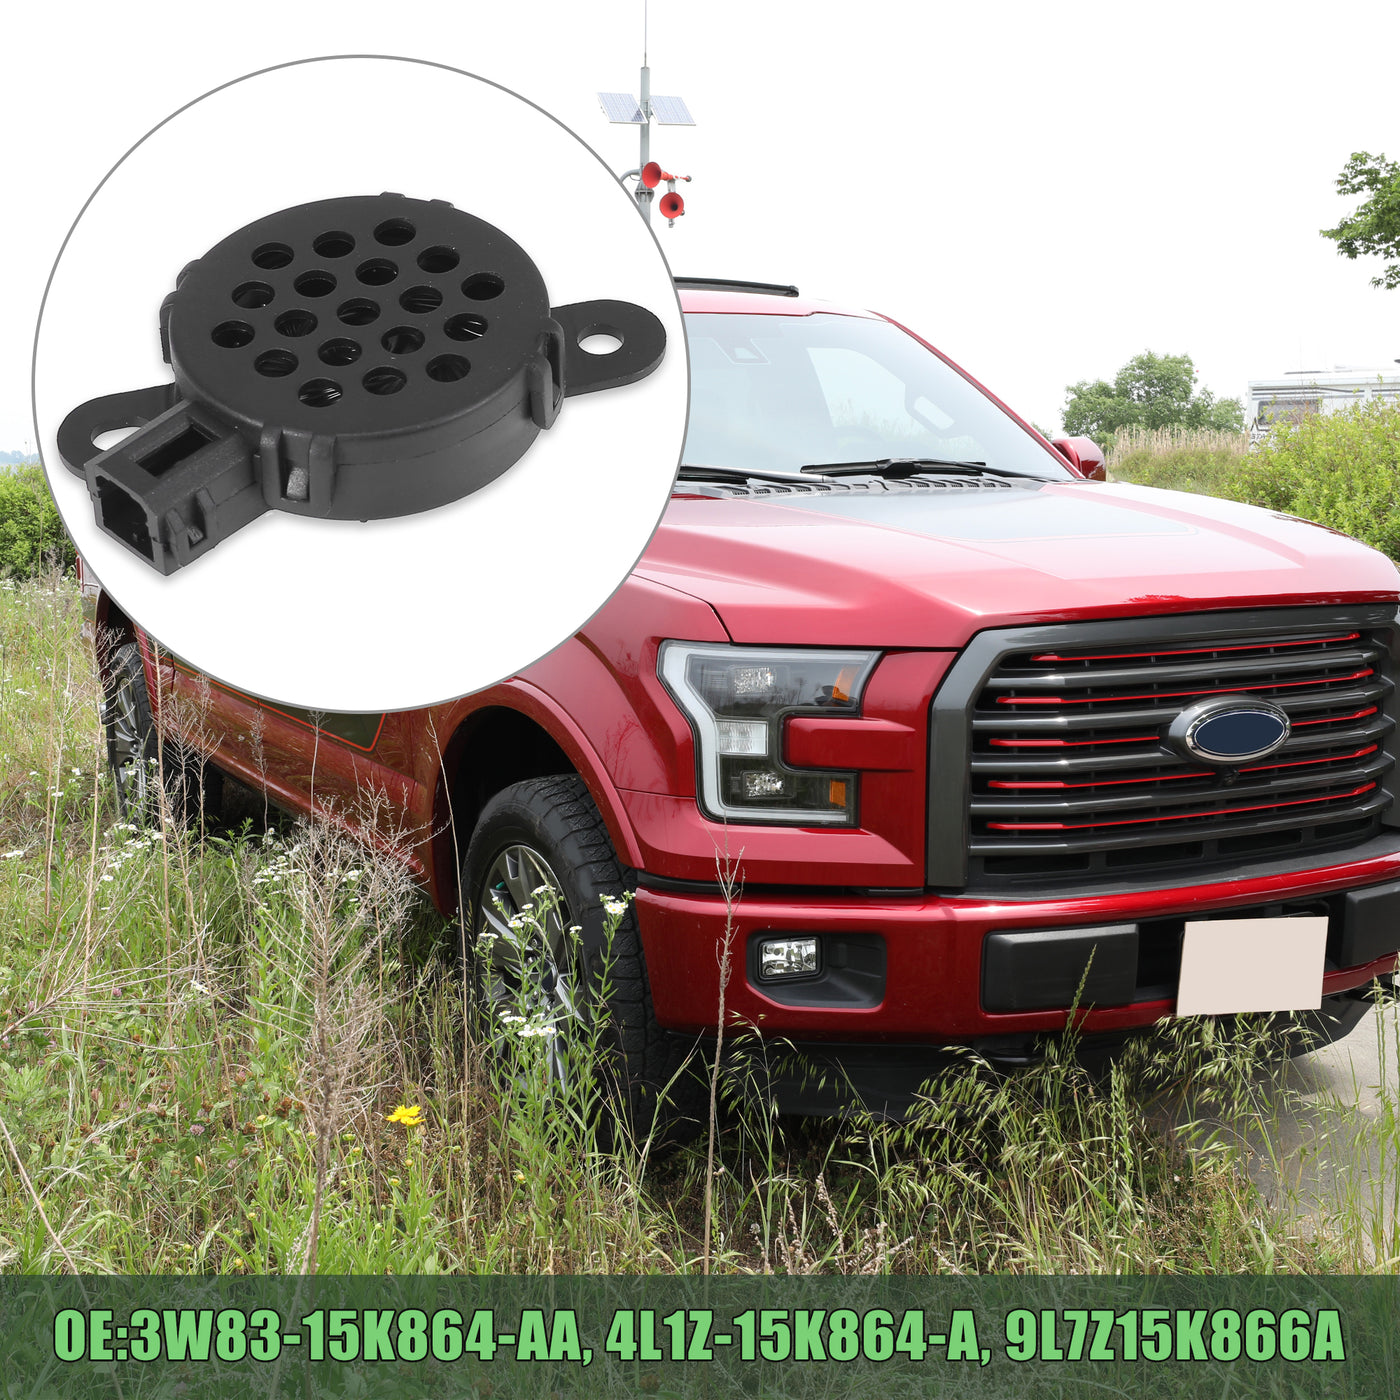 X AUTOHAUX Car Rear Park Assist Warning Buzzer for Ford F250 F350 F450 F550 Duty for Jaguar for Lincoln 3W83-15K864-AA 4L1Z-15K864-A 9L7Z15K866A